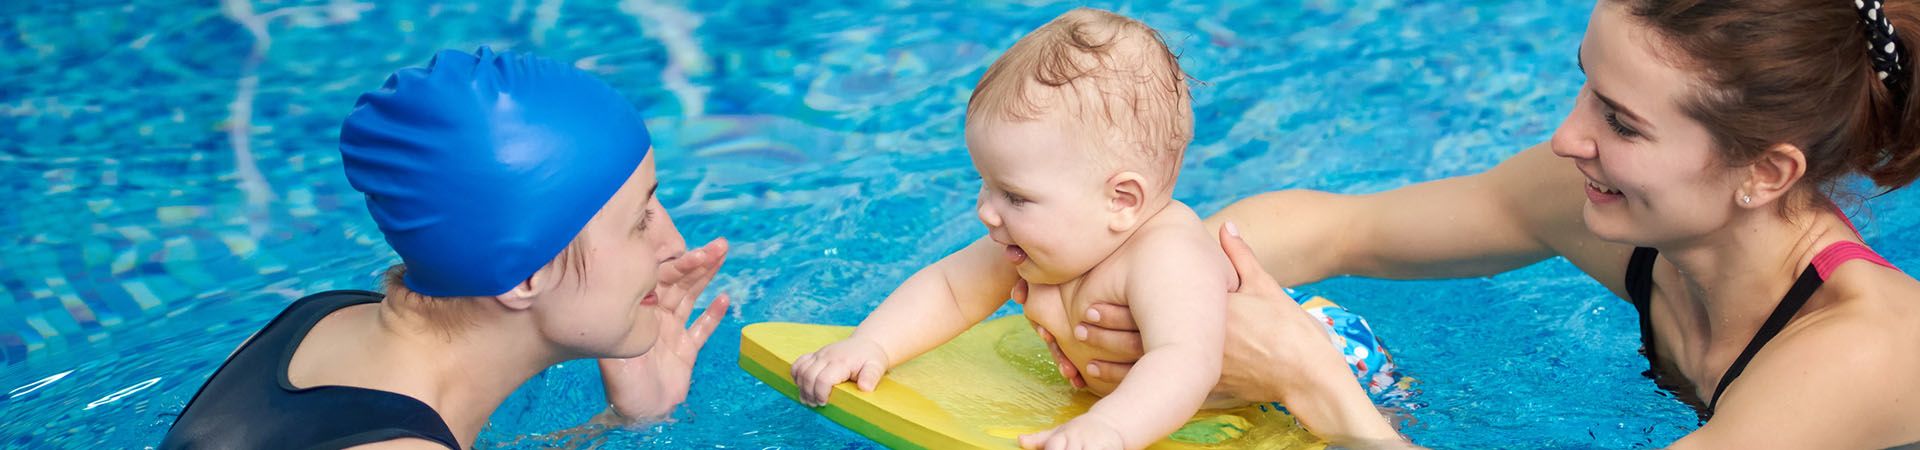 Mother enjoying the closeness with her child during baby swimming.